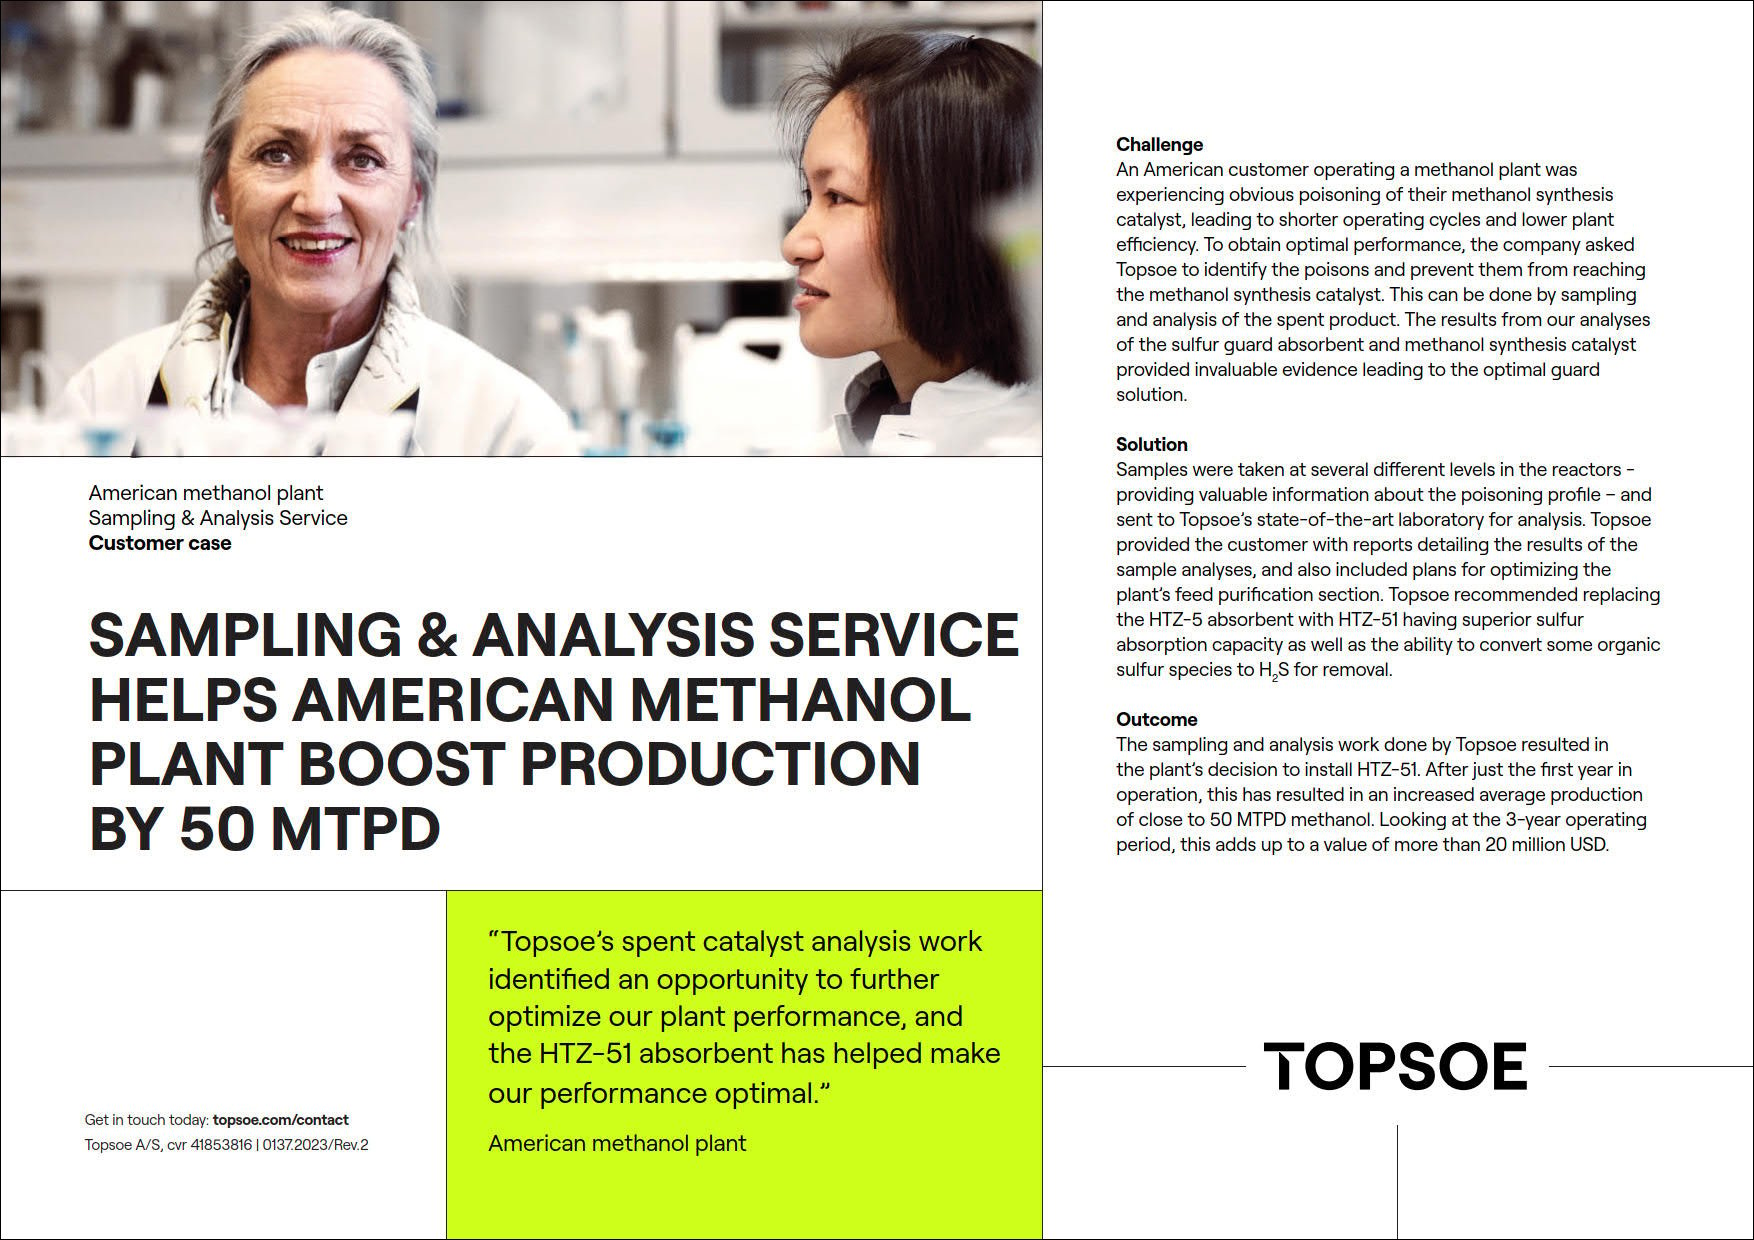 Sampling & Analysis Service Helps American Methanol Plant Boost Production by 50 MTPD